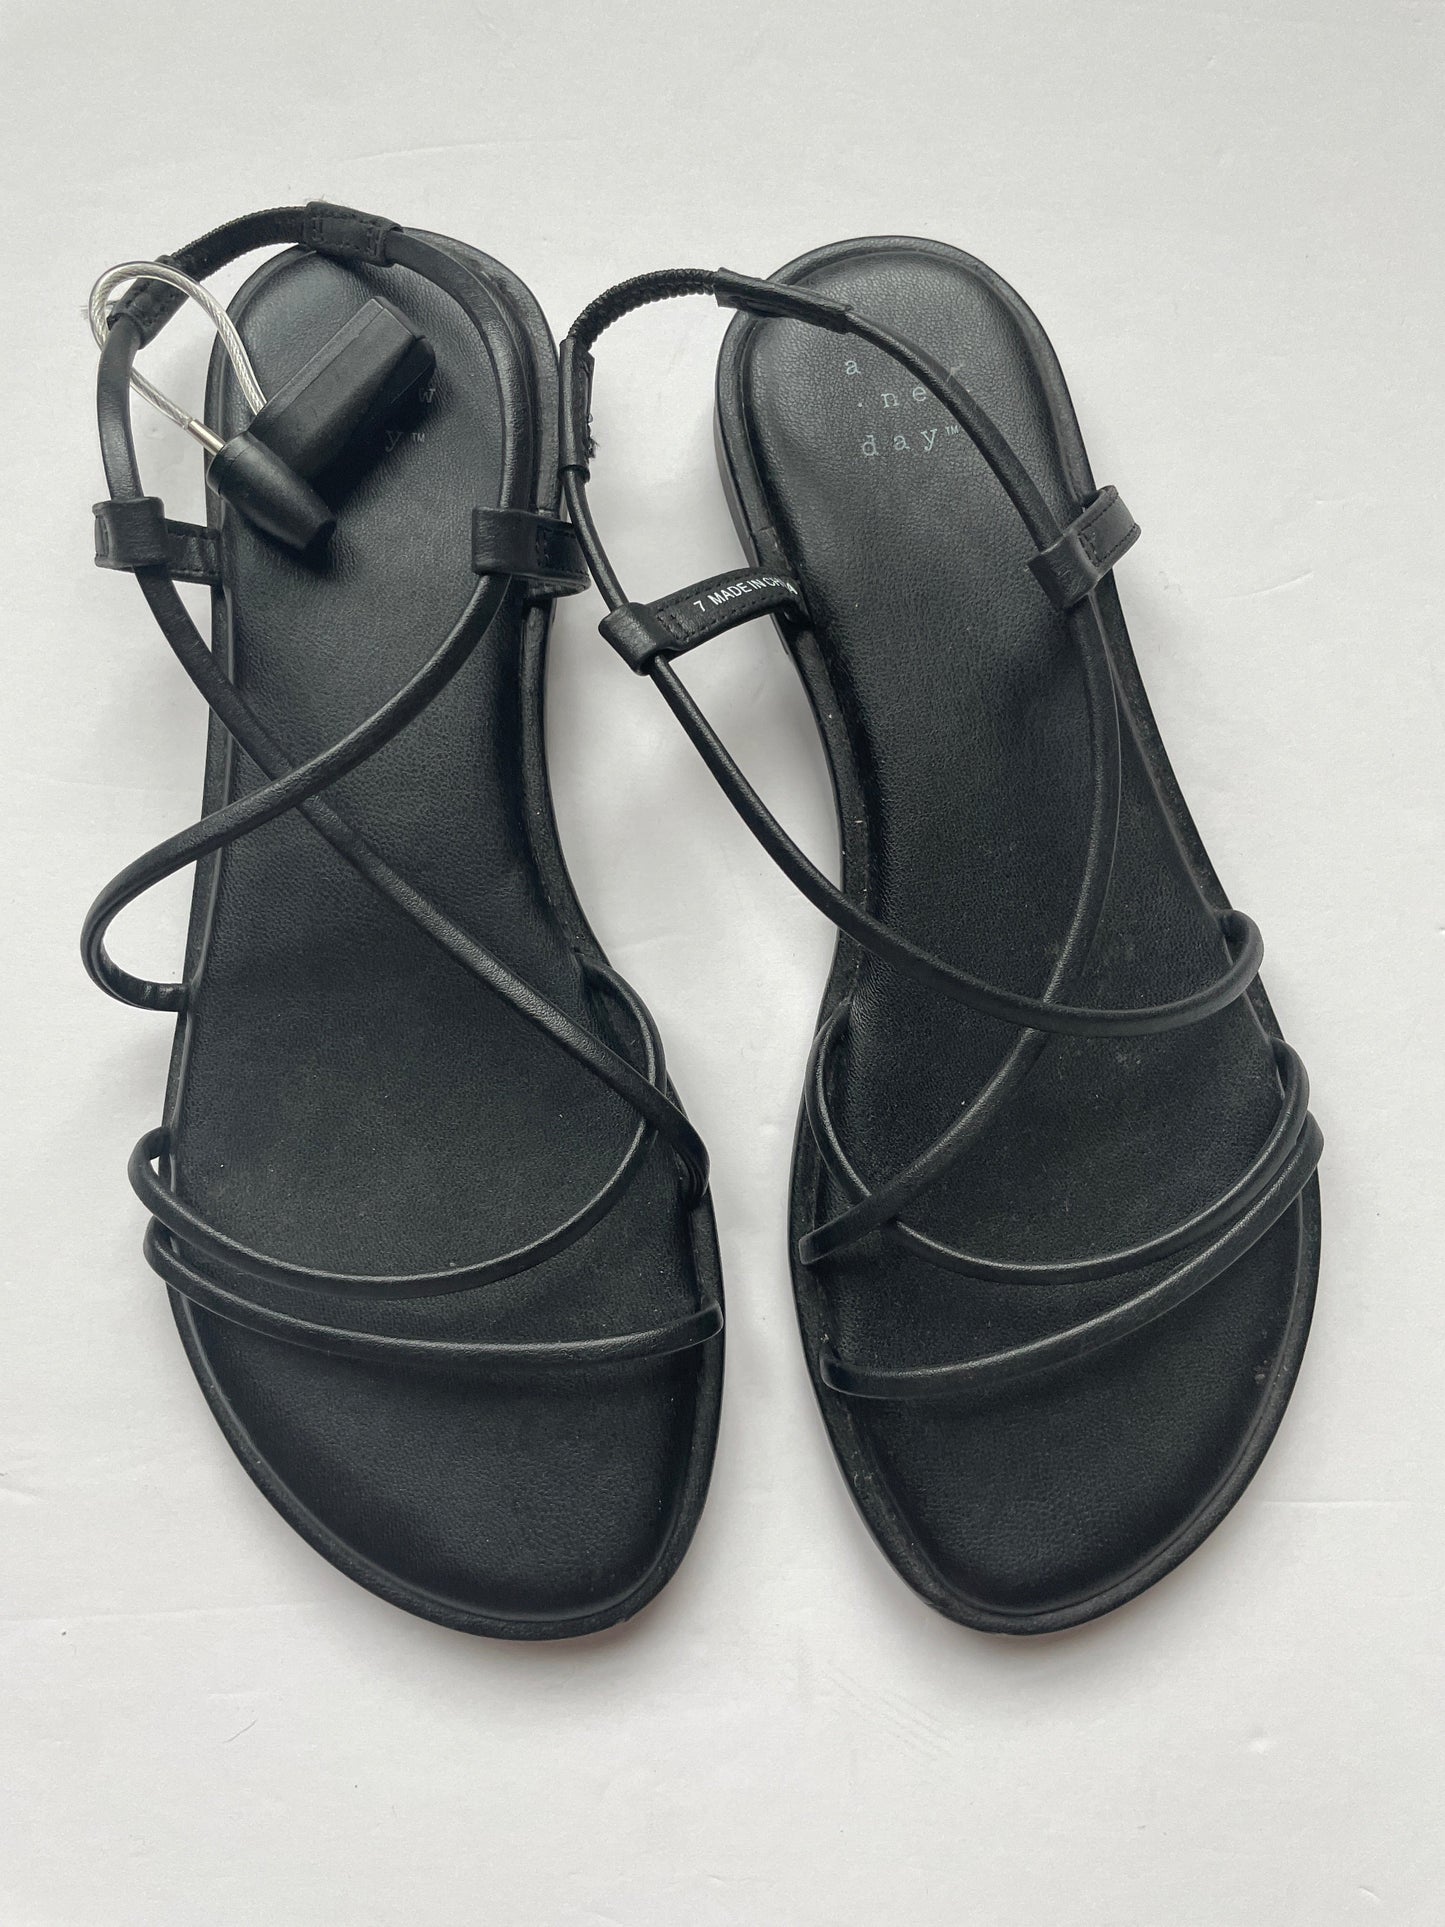 Black Sandals Flats A New Day, Size 7